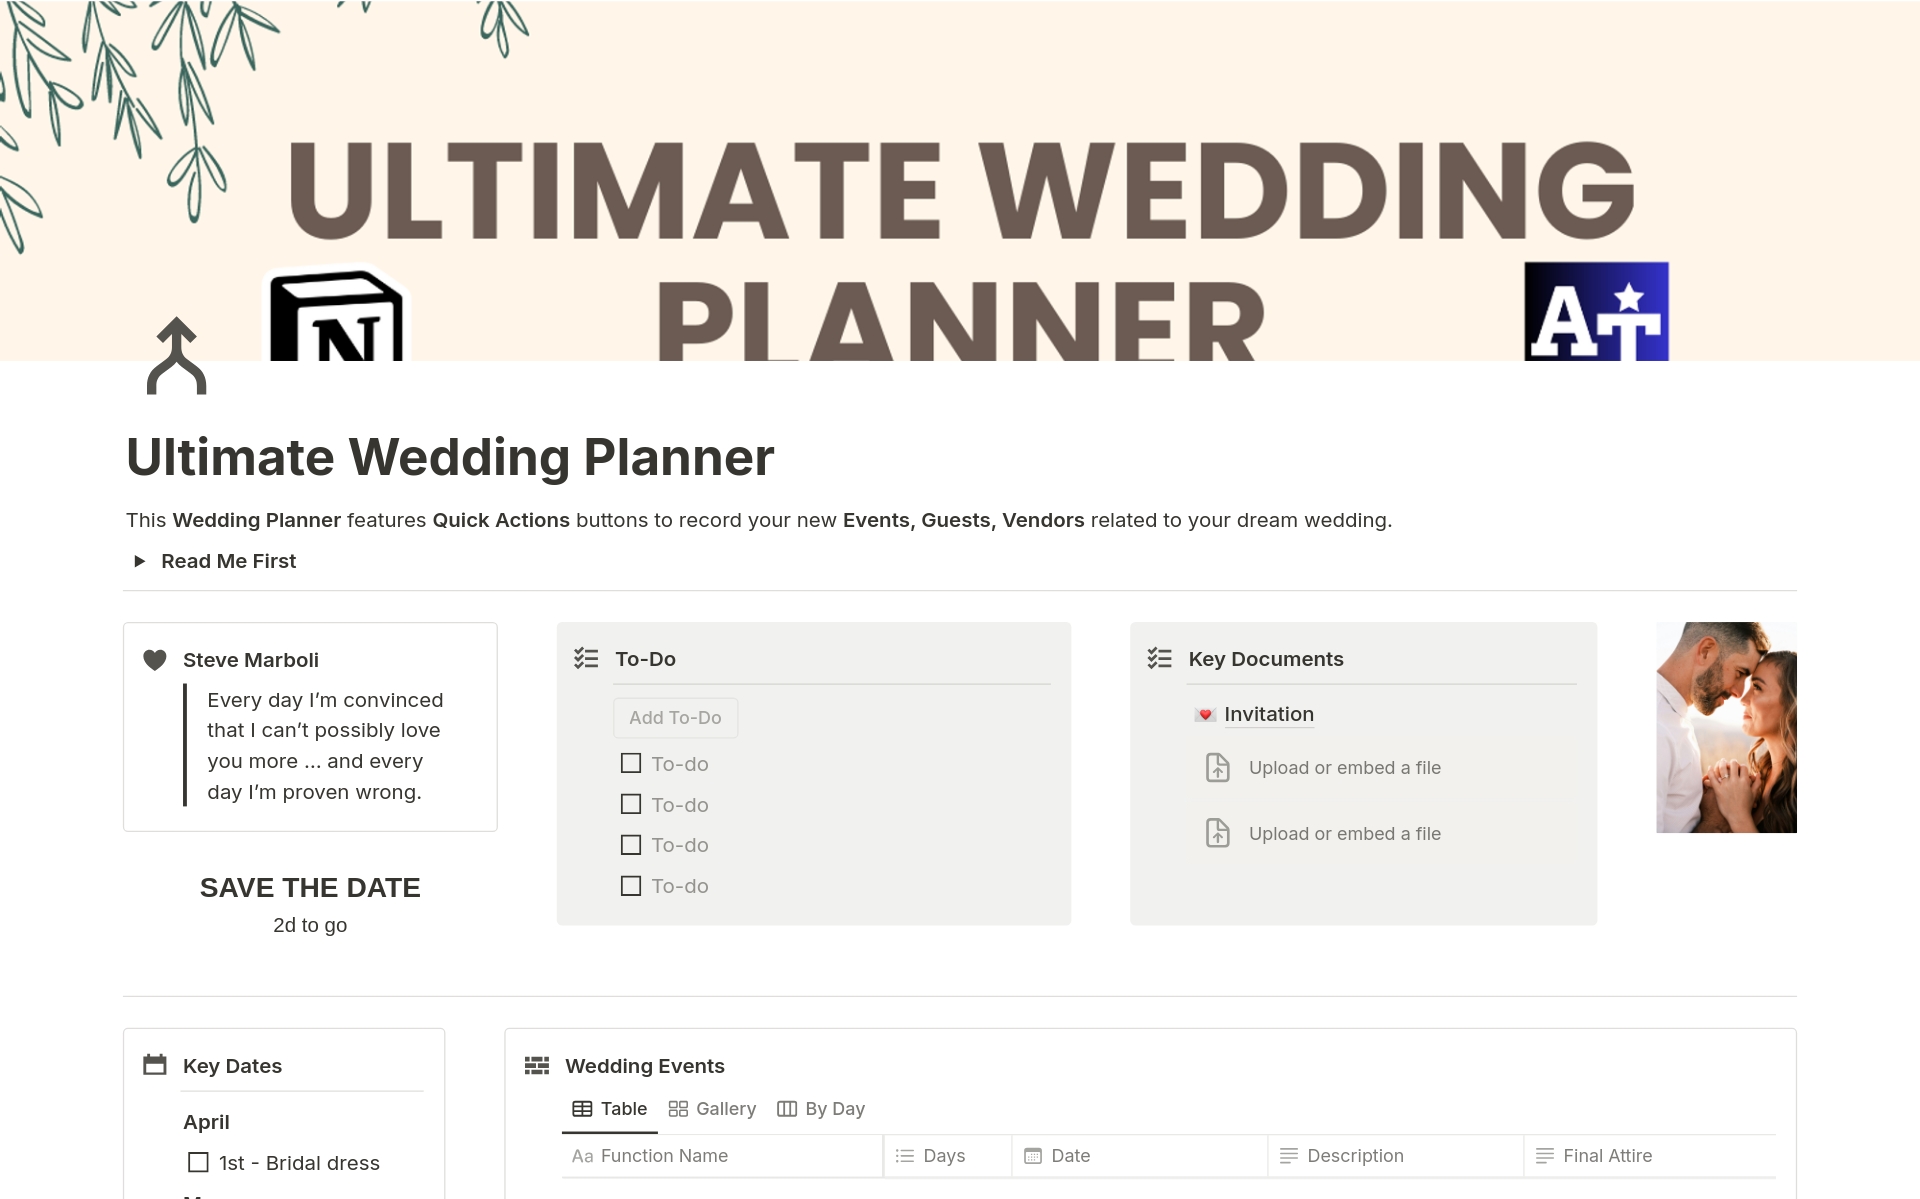 This Wedding Planner features Quick Actions buttons to record your new Events, Guests, and Vendors related to your dream wedding.